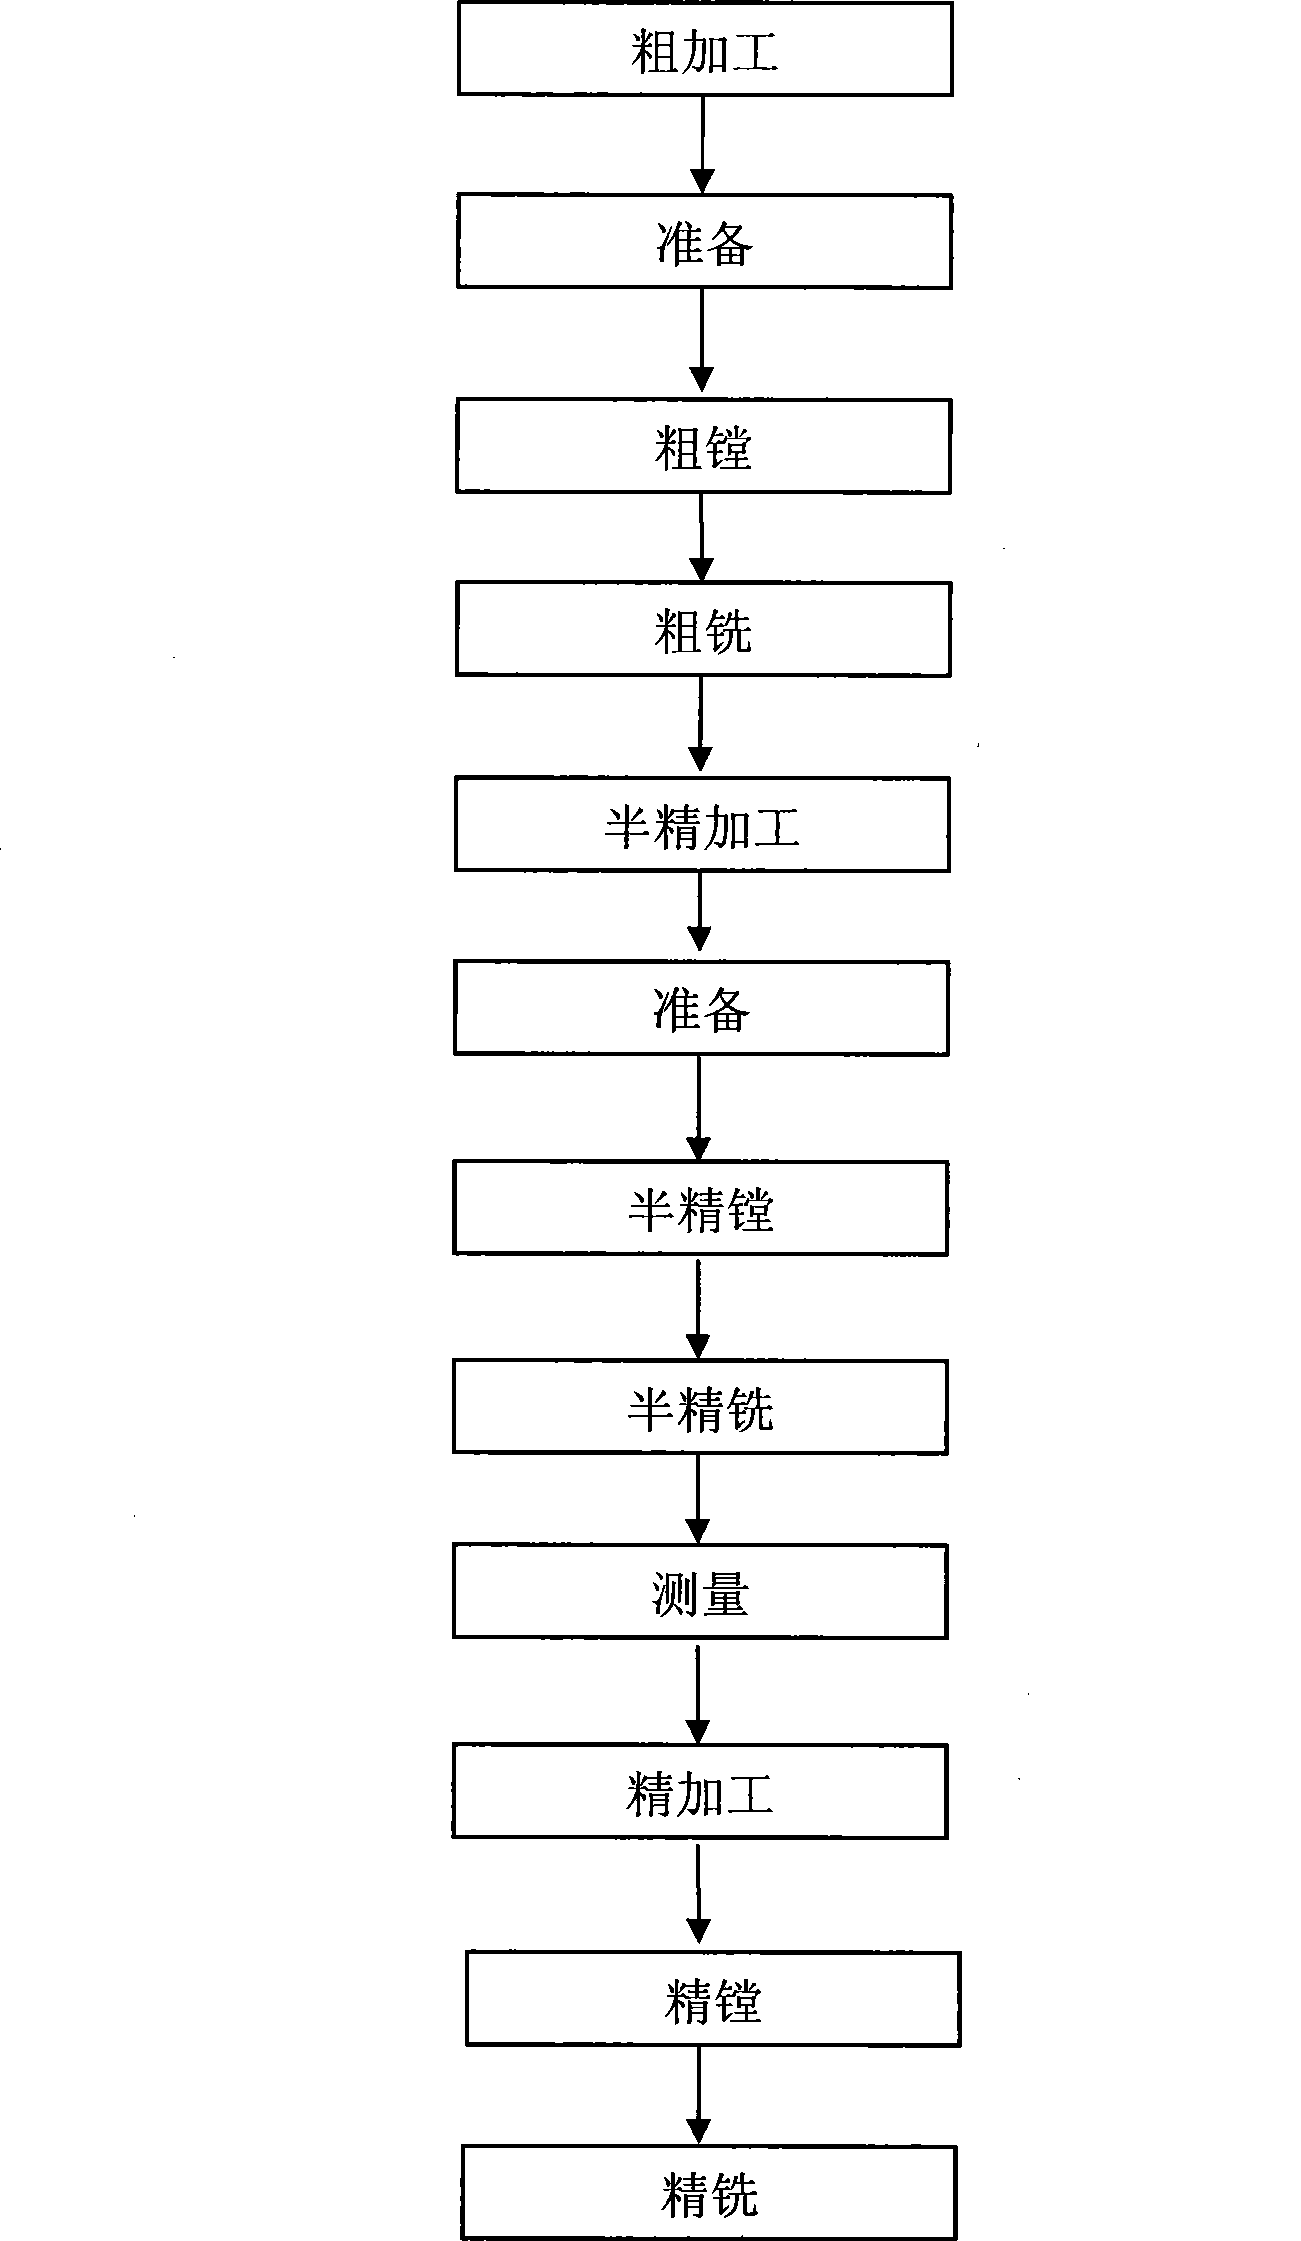 Method for processing pressing sleeve hole of large diameter in top and bottom cross member of oil press